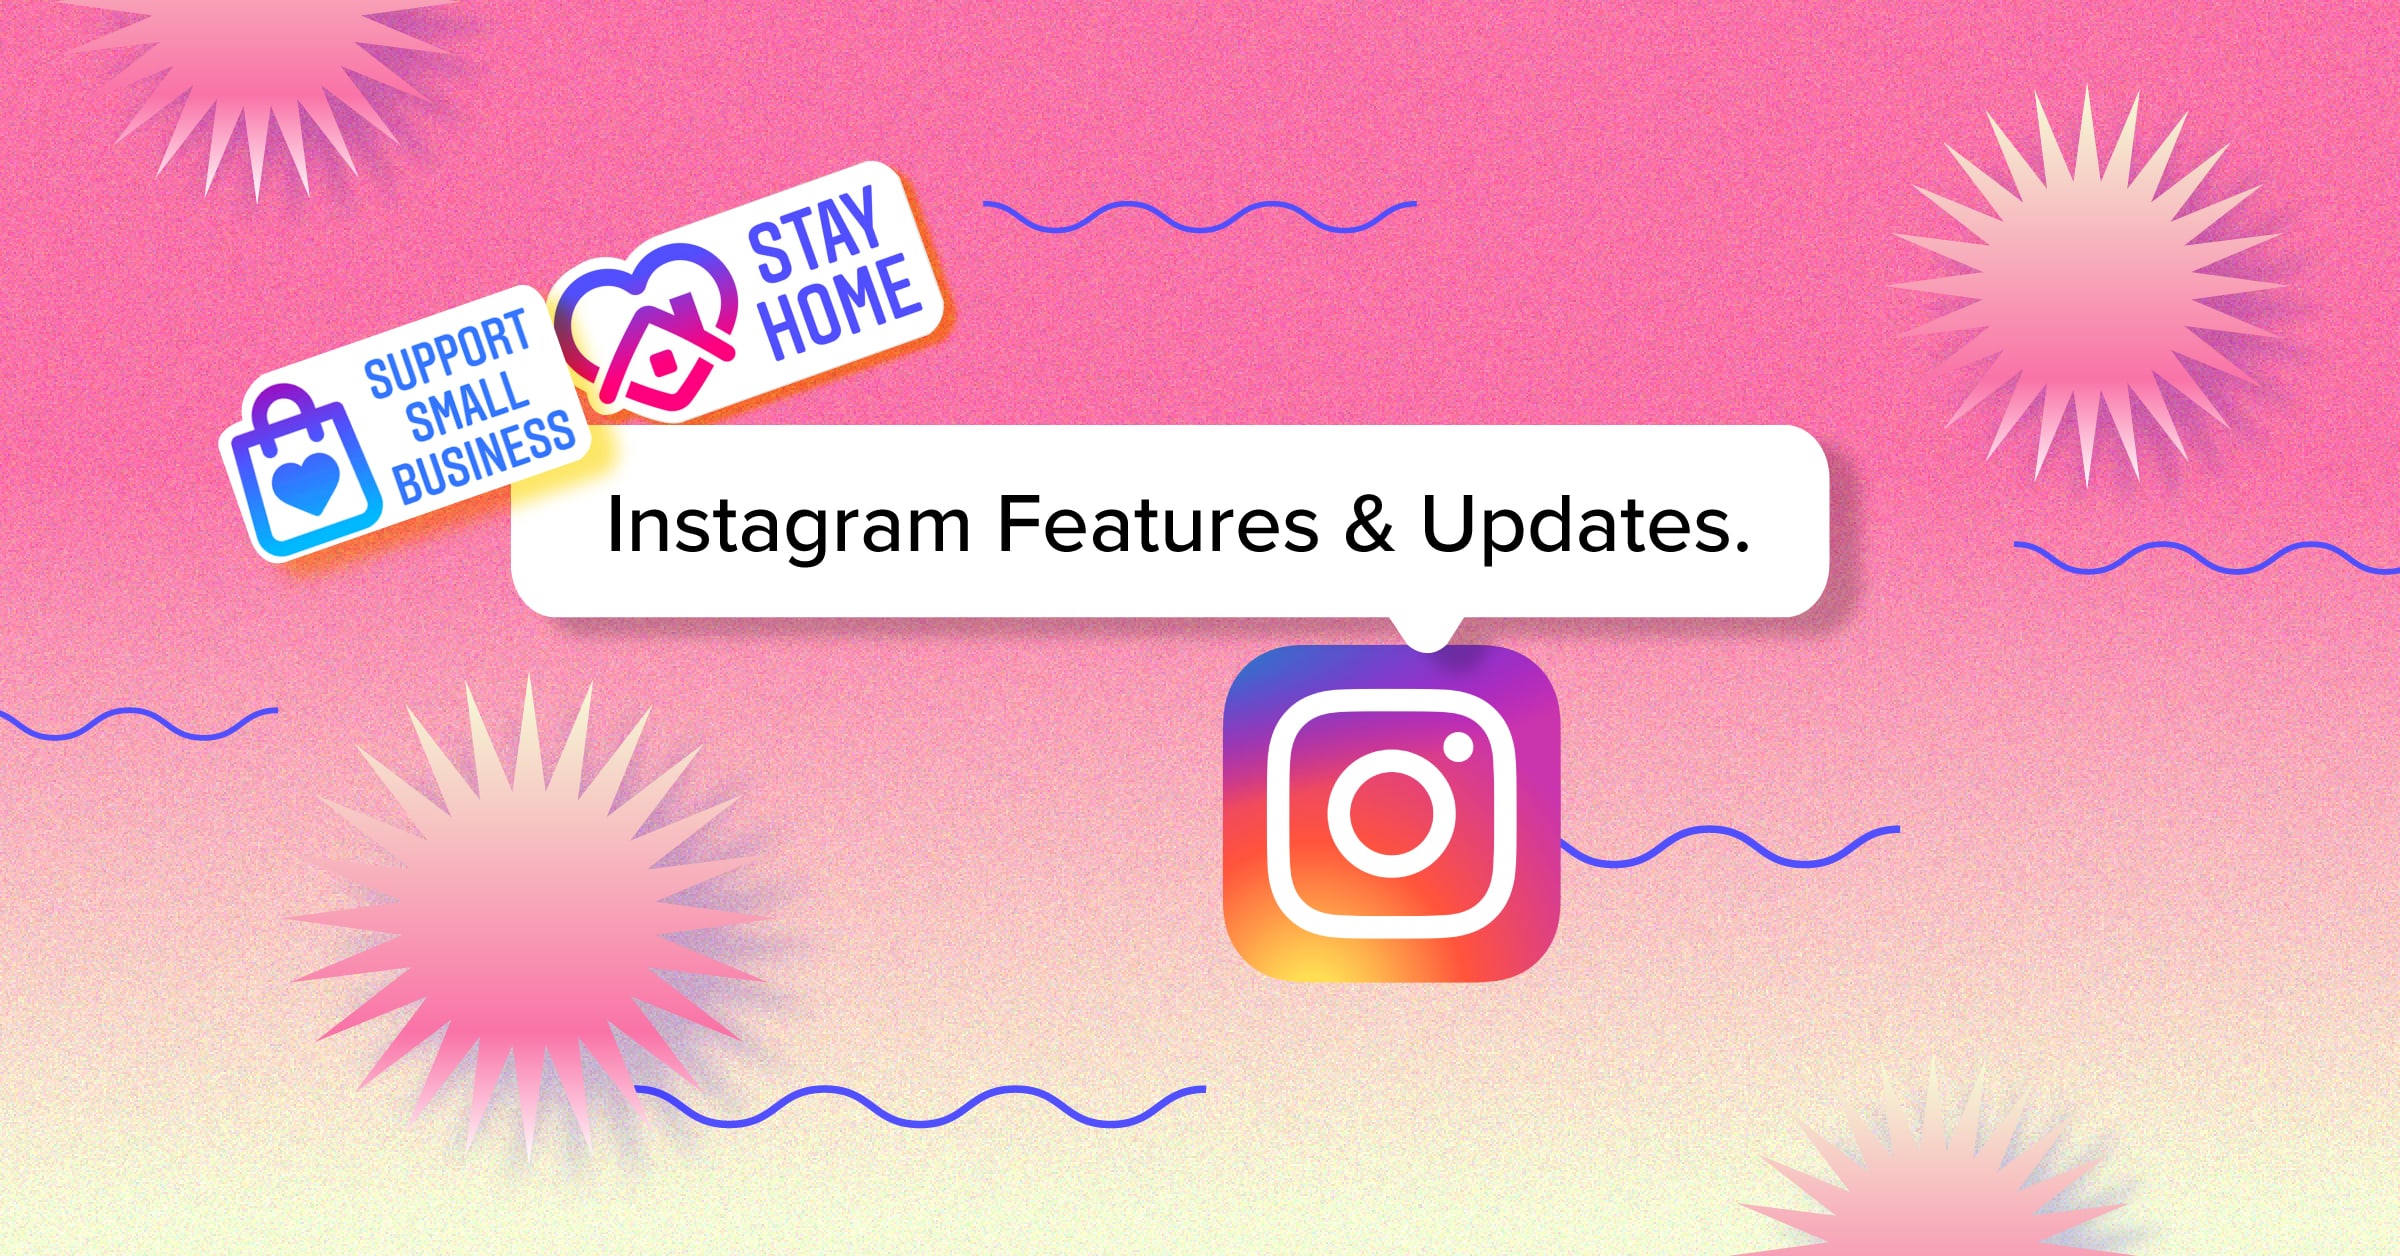 20 New Instagram Features and Updates You Should Be Aware Of. Falcon.io